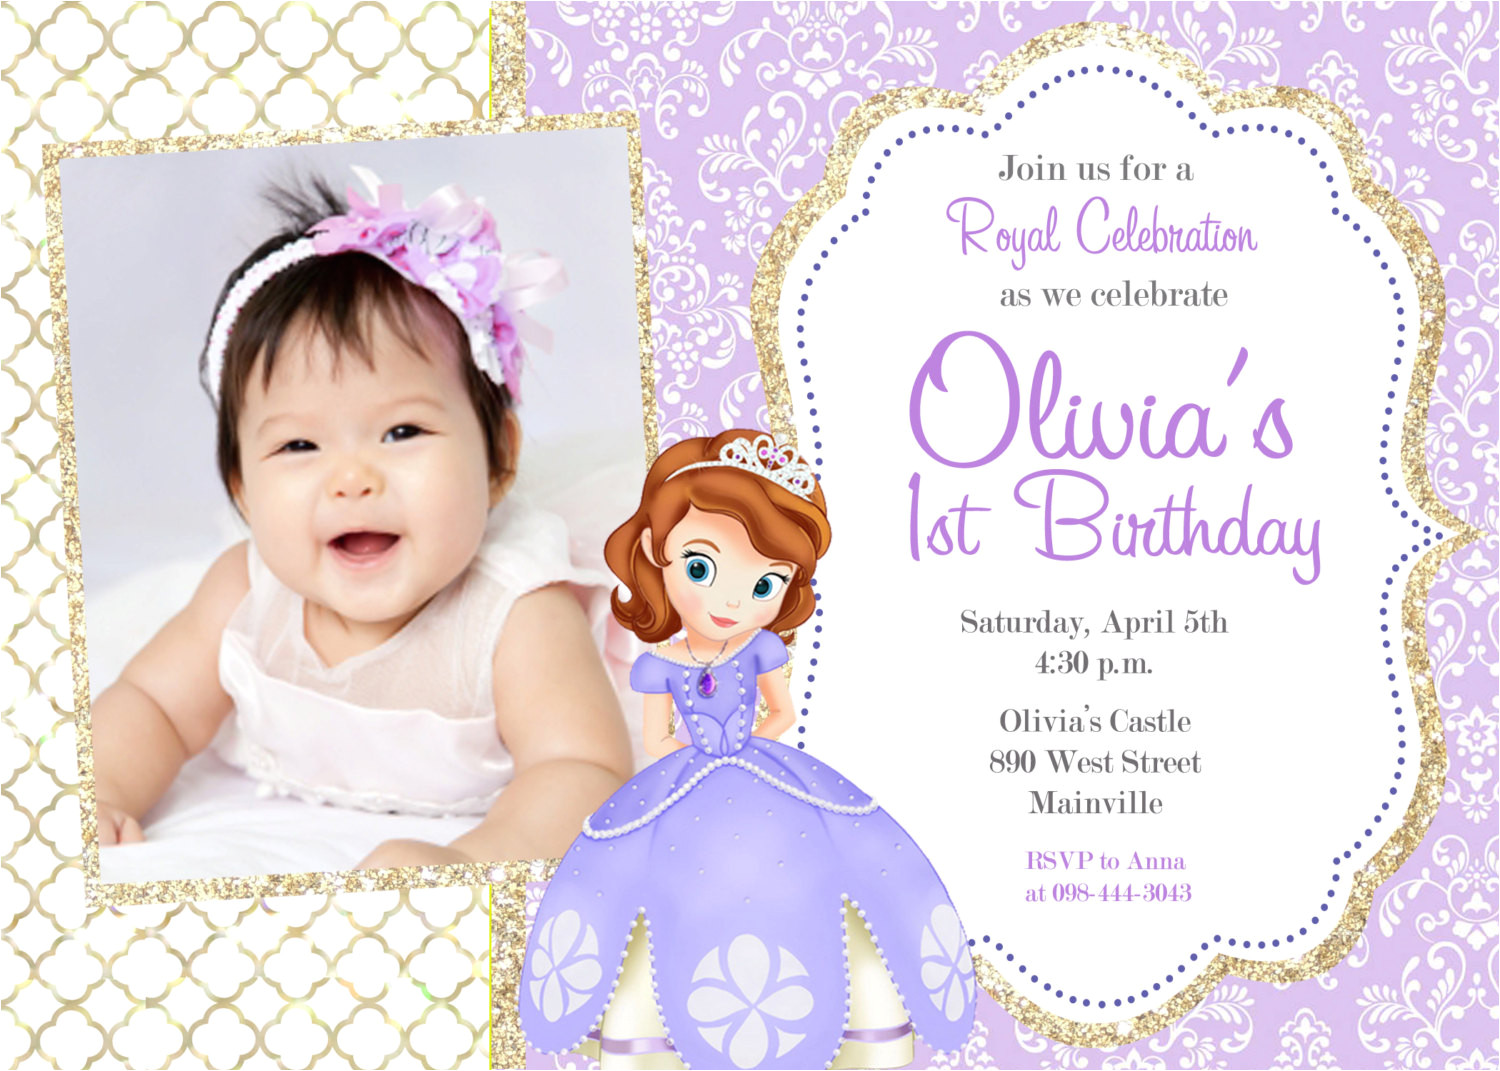 sofia the first party invitations with easy on the eye party invitation templates as a result of an application using a felicitous concept 5